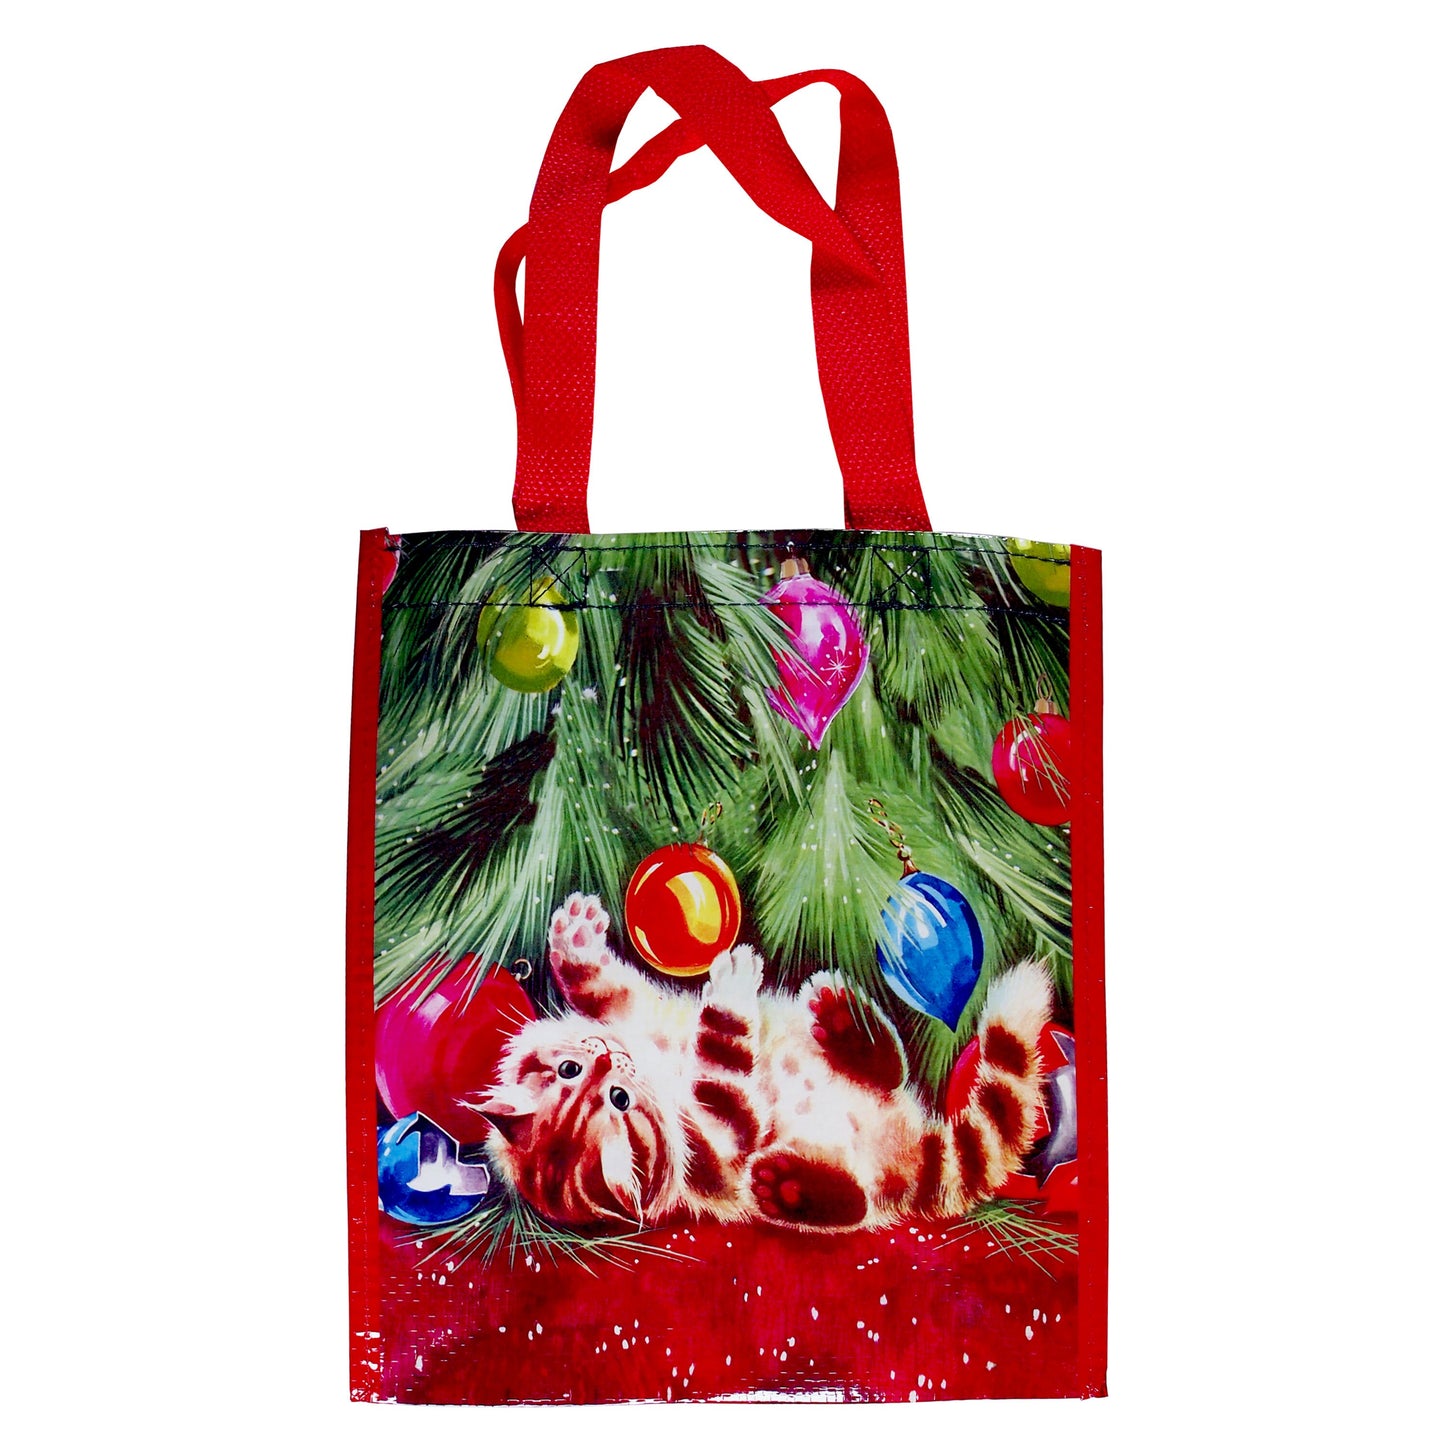 Small Reusable Eco Friendly Christmas Shopping/Gift Bag - Kitten Under A Tree